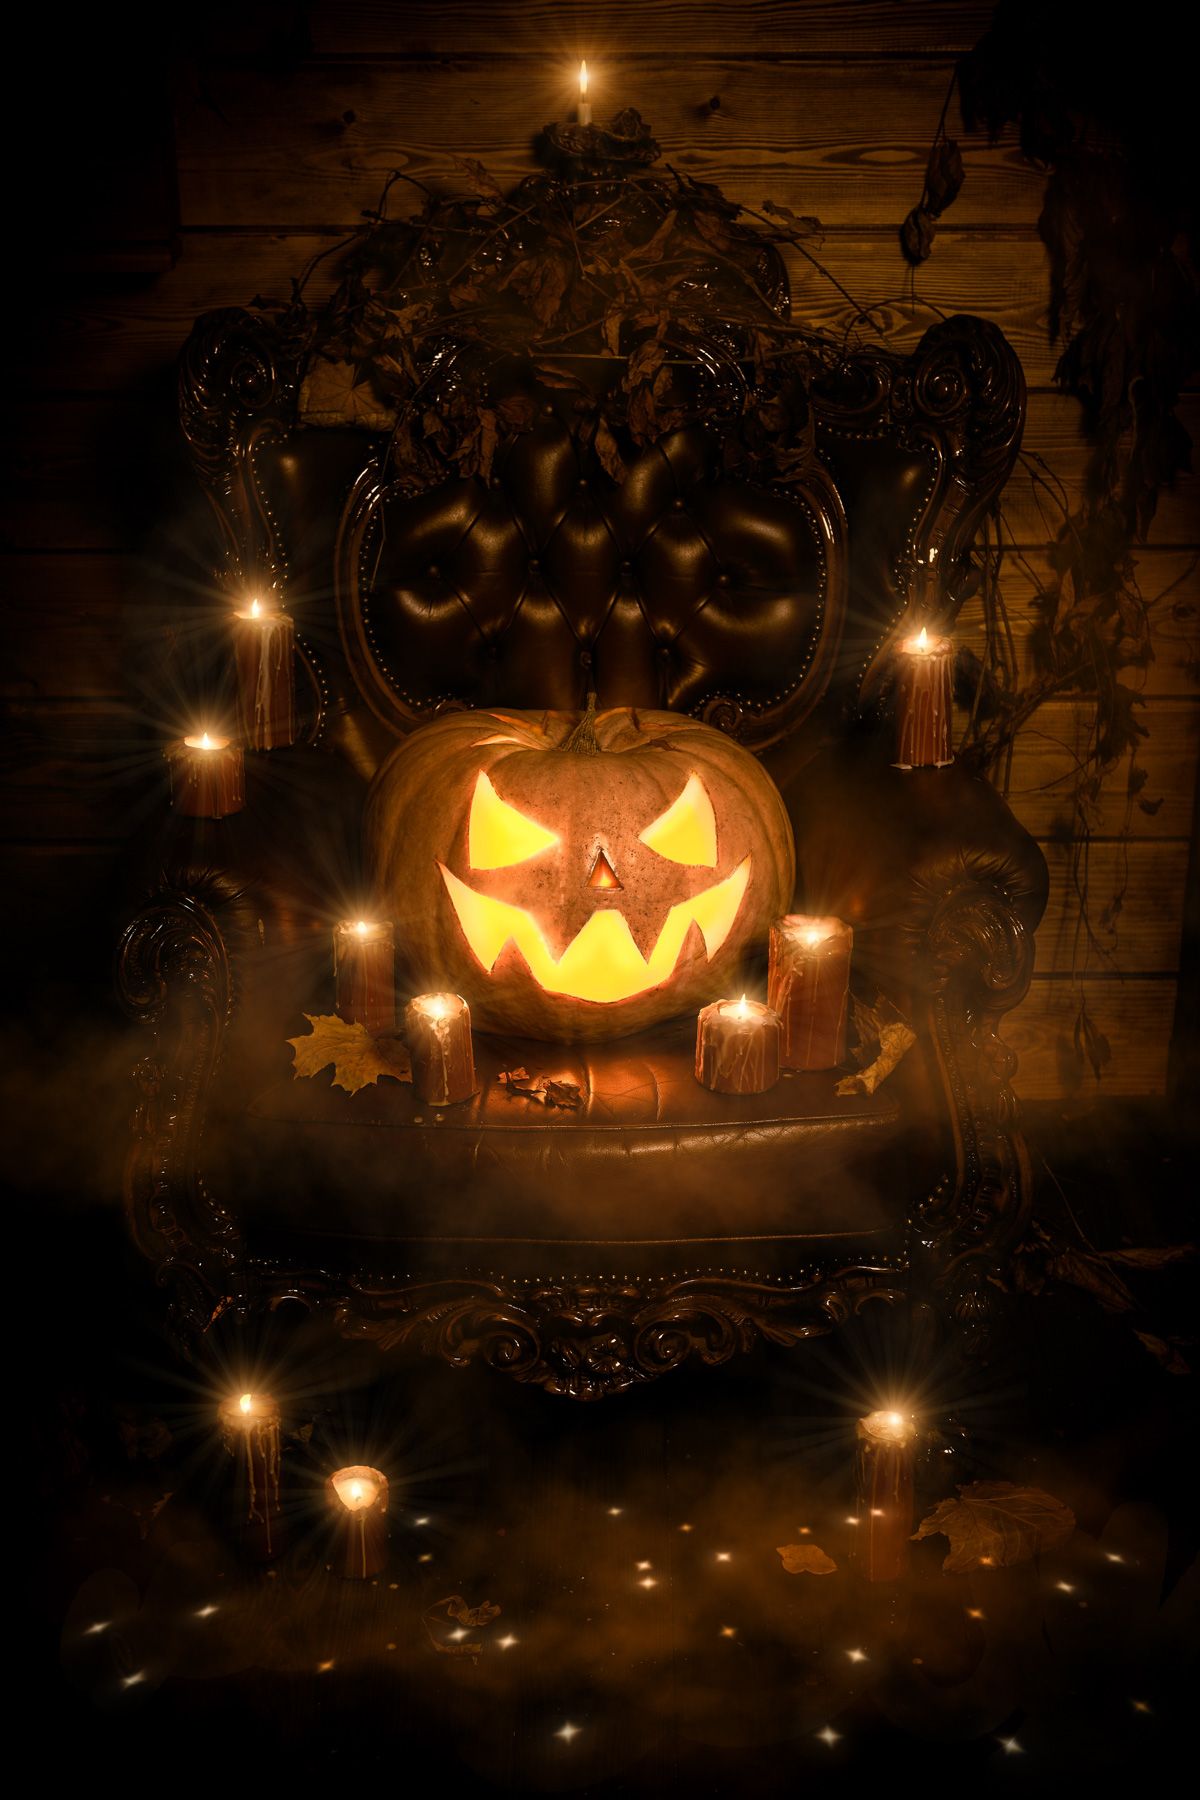 Los Angeles Haunted Houses: A glowing jack-o-lantern in dim light sits on an ornate leather armchair, surrounded by candles and fall leaves.